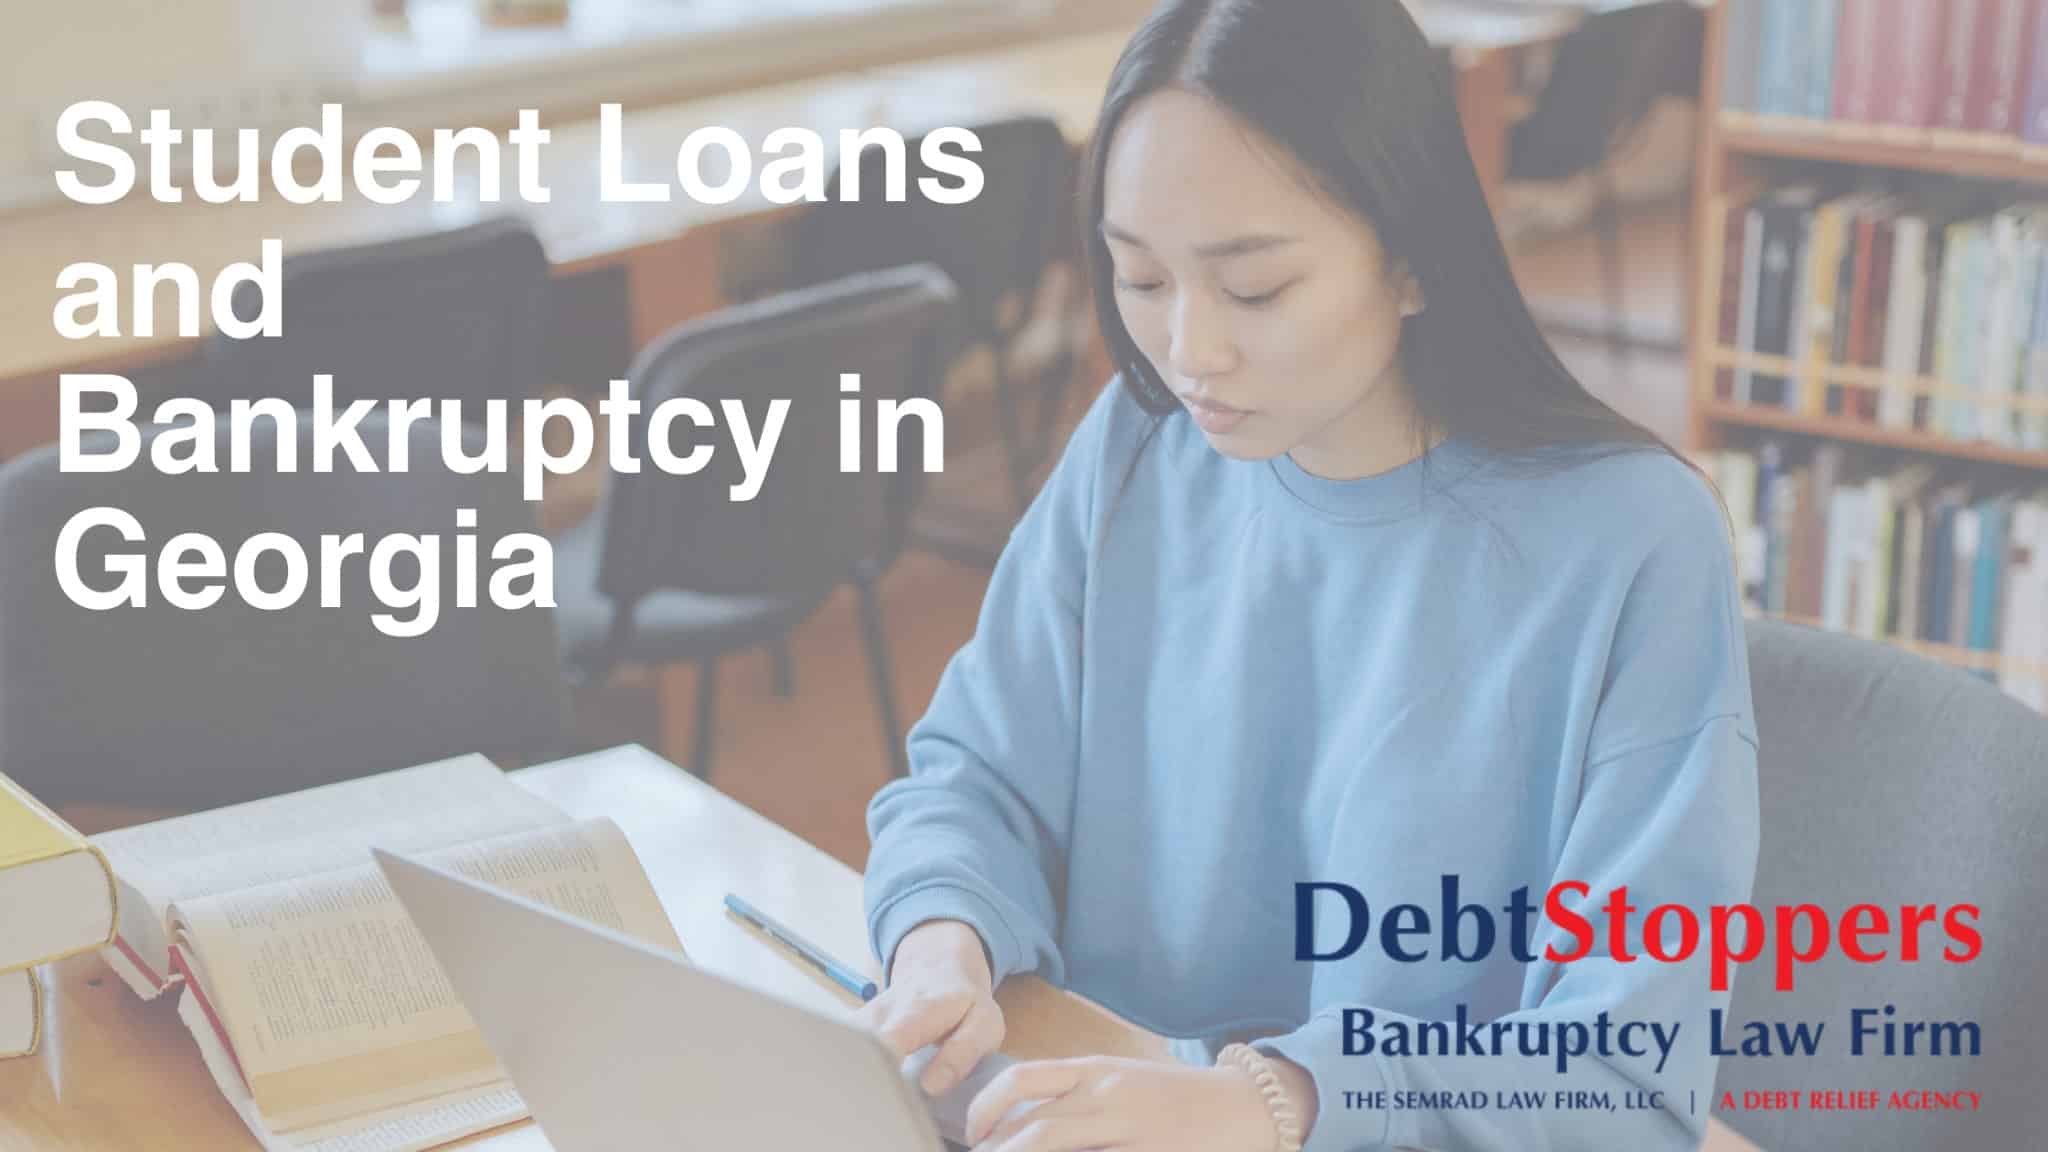 Student Loans and Bankruptcy in Georgia